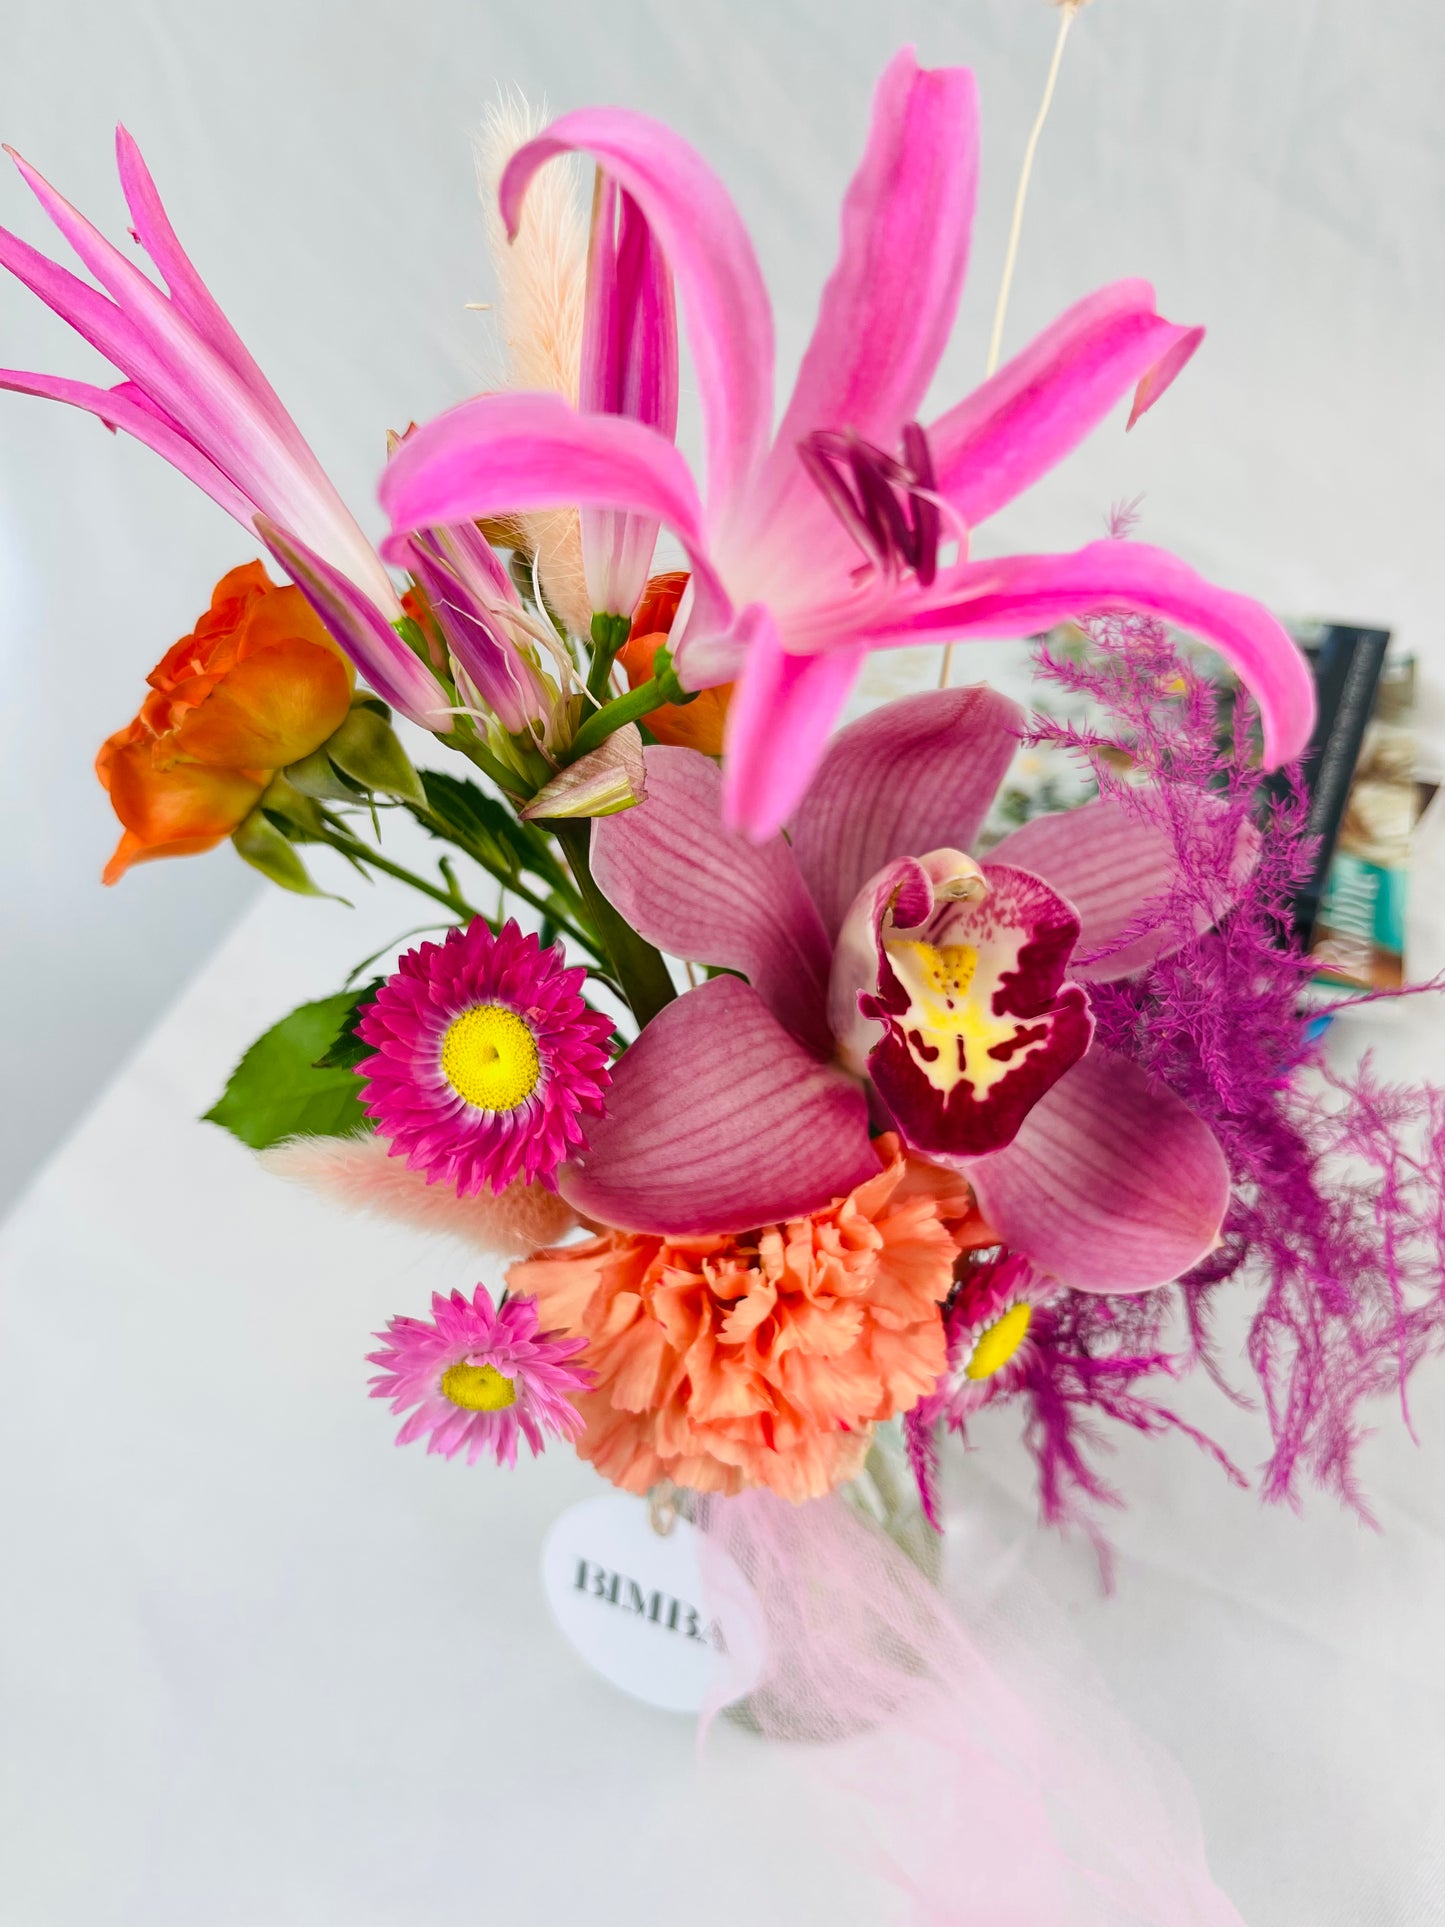 Full of grace mini floral arrangement, in hues of fuchsia and orange tones featuring luxury orchids, eye-catching nerine or french Clematis, sweet scented  mini blooms, timeless carnation, dried conserved acroclinium or camomille flower, asparagus fern and bunny tails.